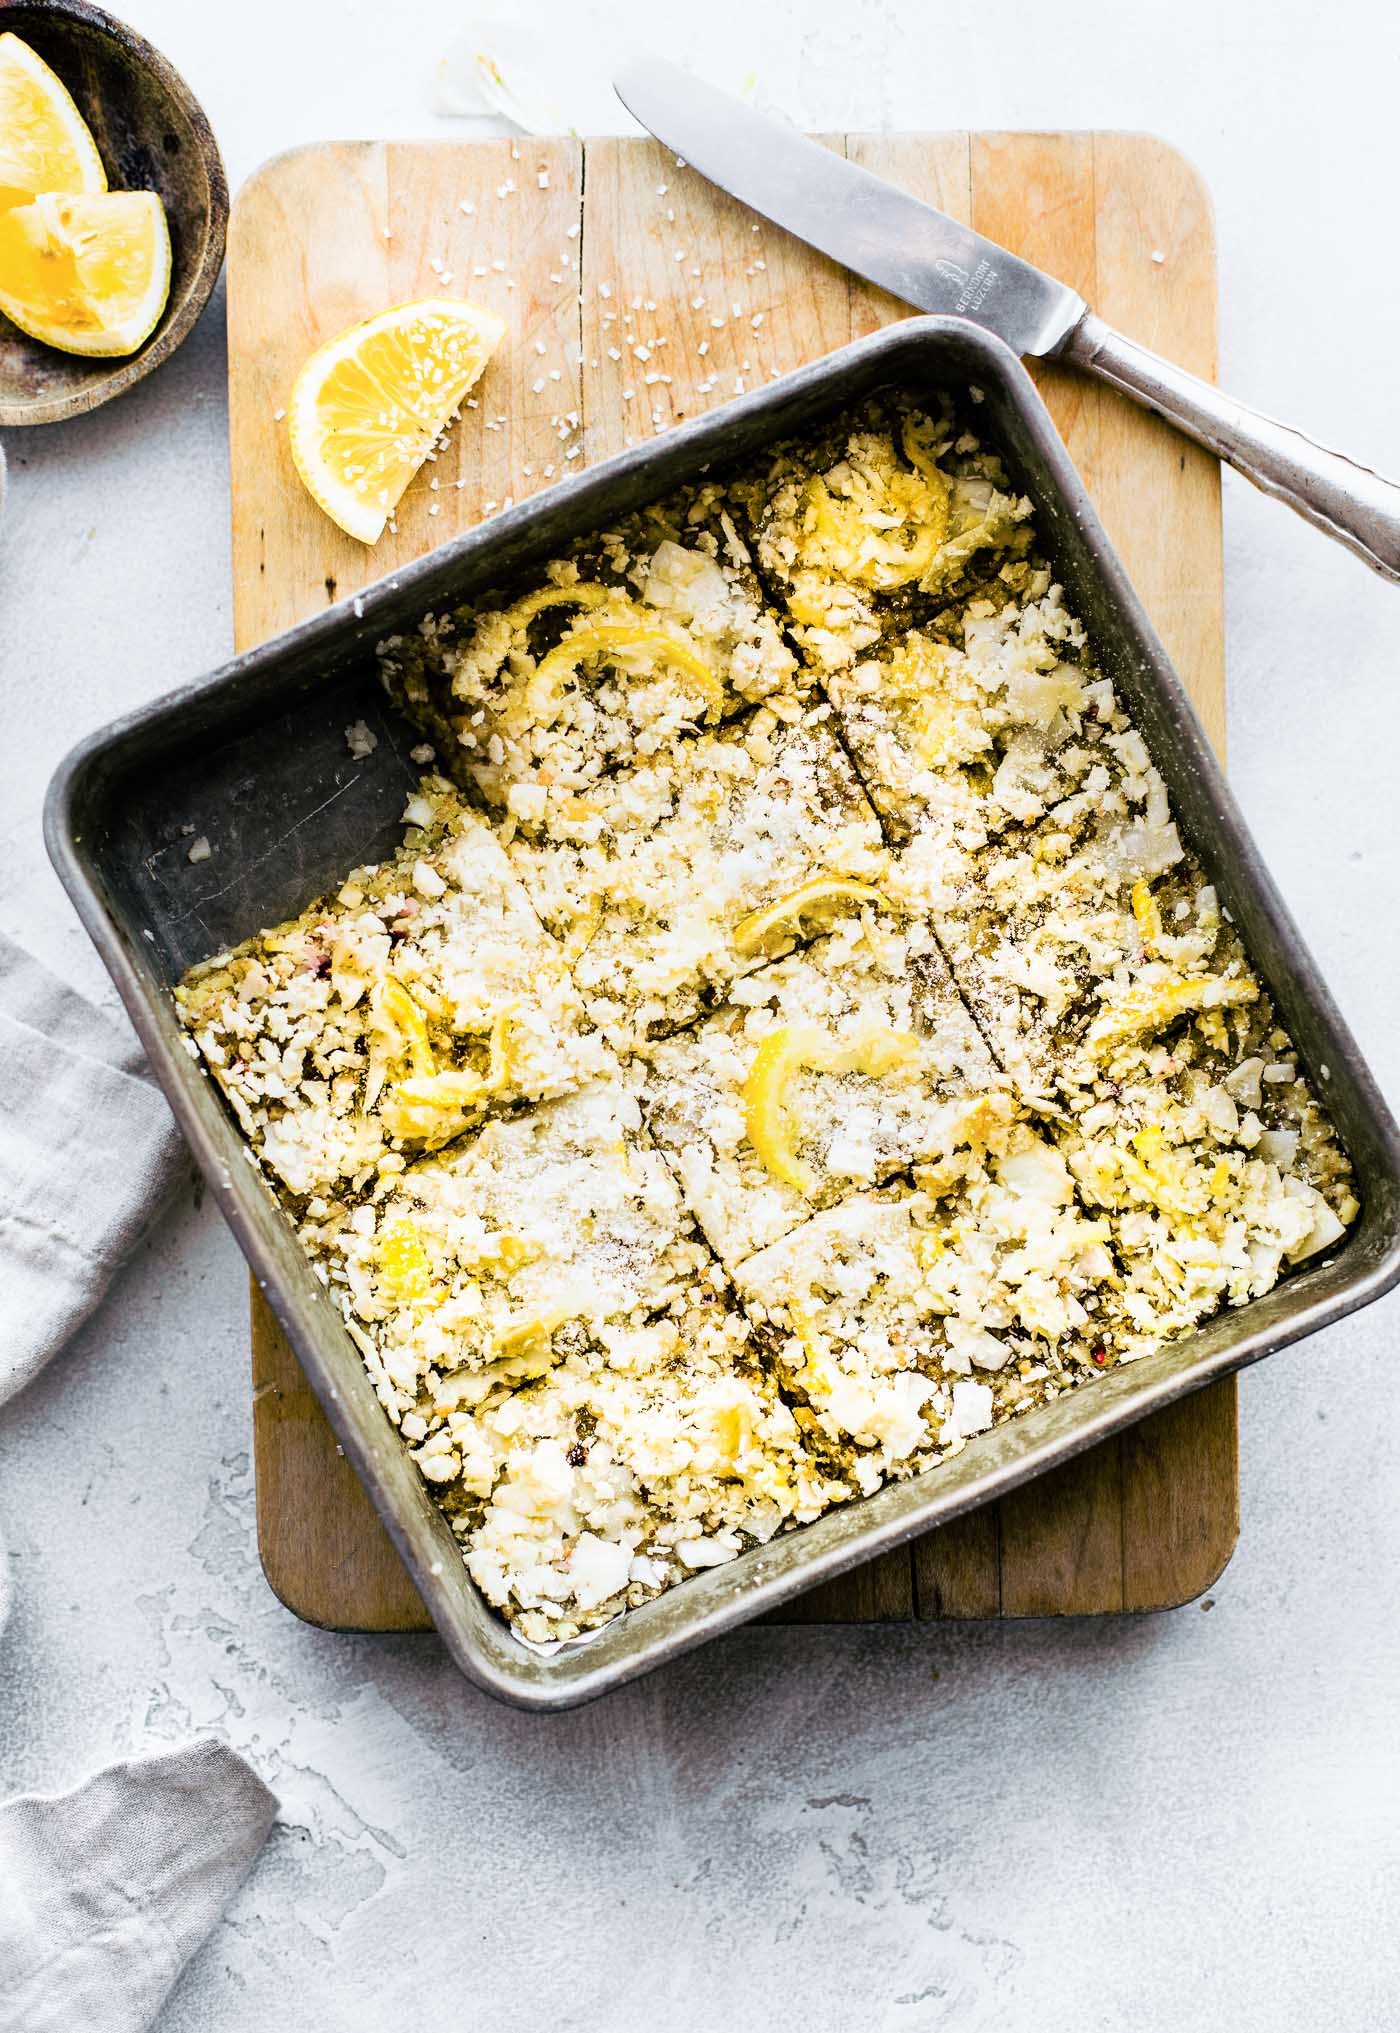 Overhead view square baking pan filled with lemon coconut energy bars, one bar removed from pan